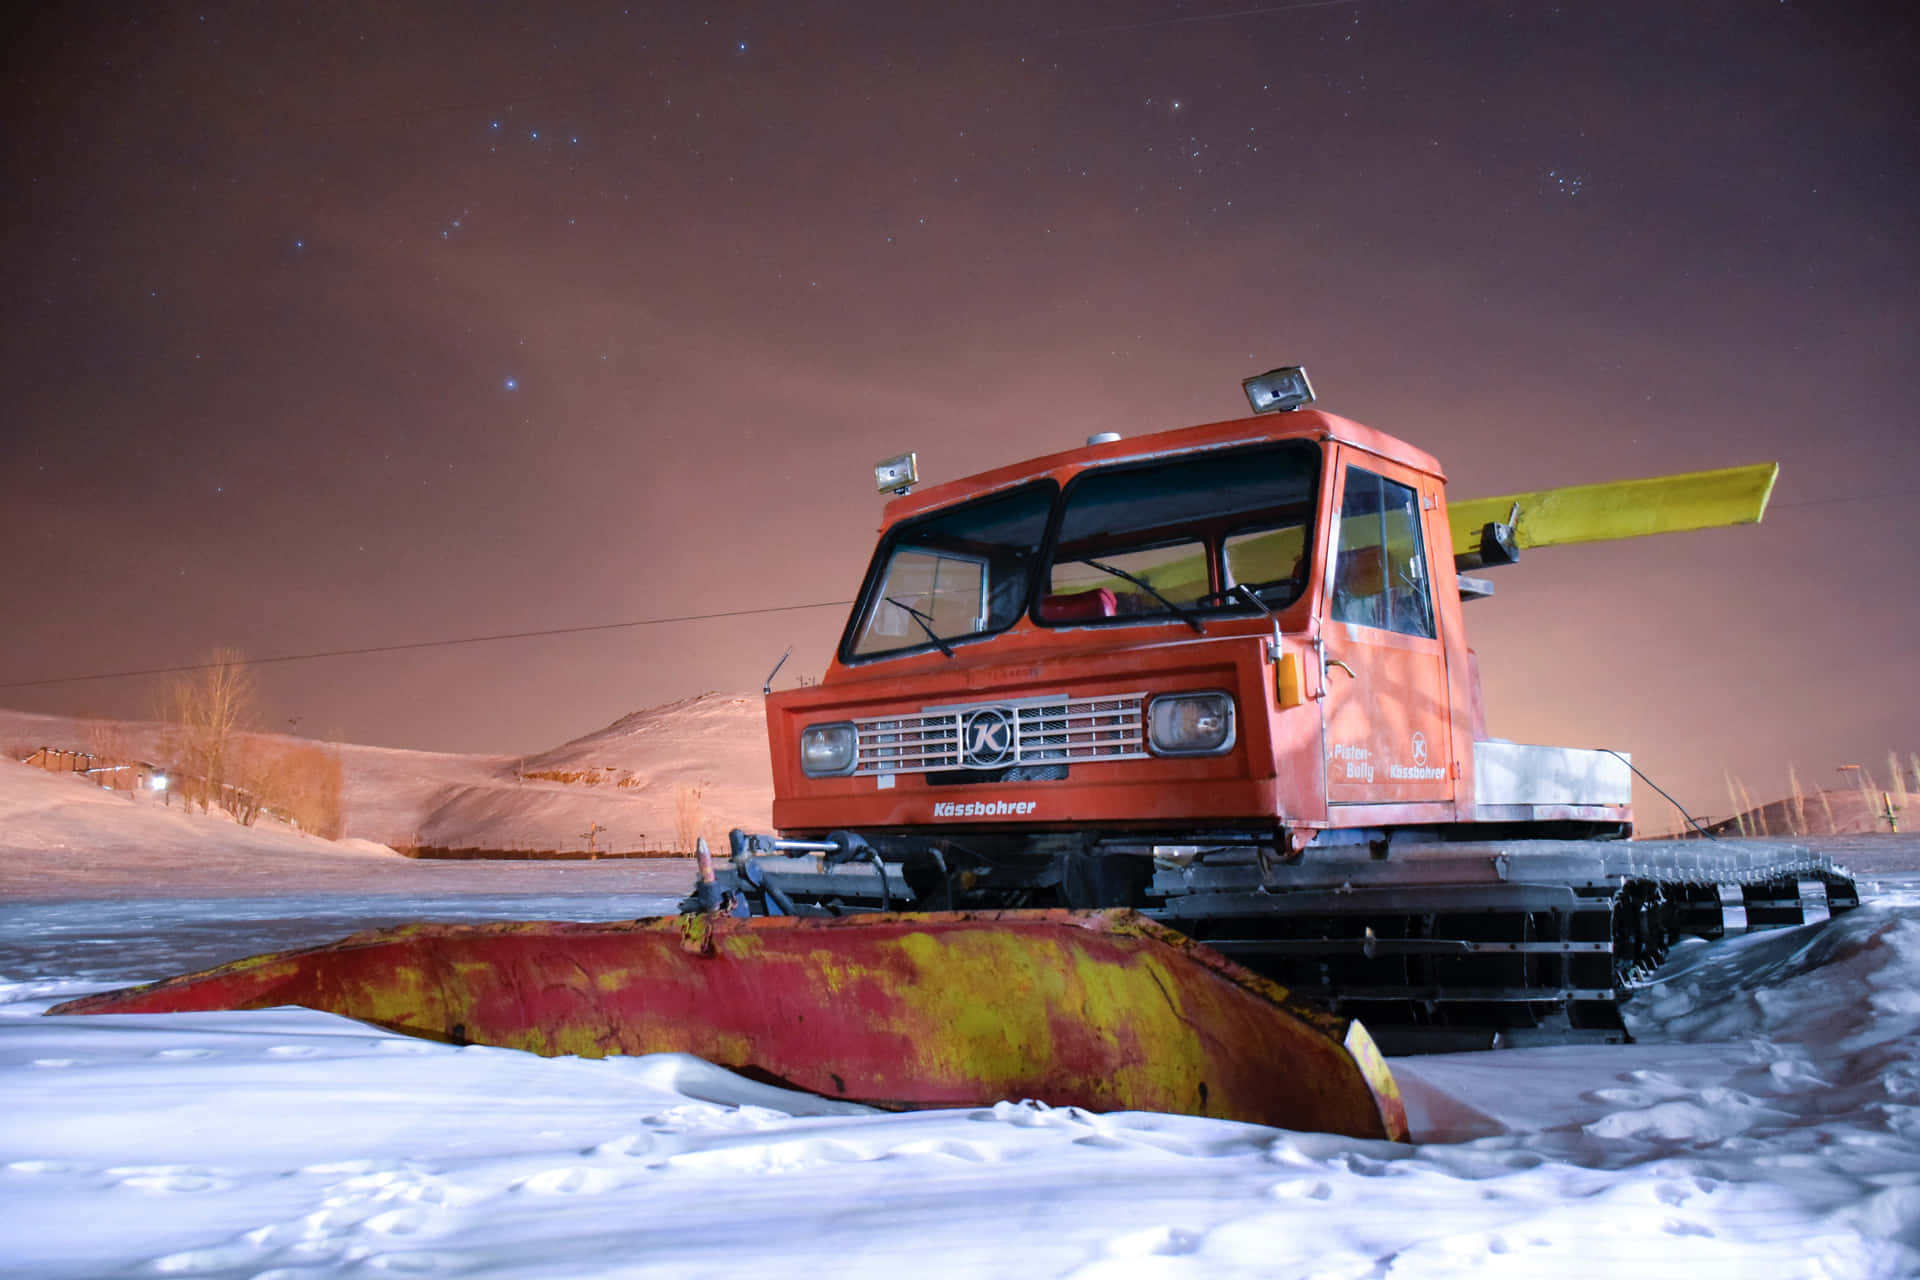 Powerful snowplow clearing the road during a heavy snowfall Wallpaper